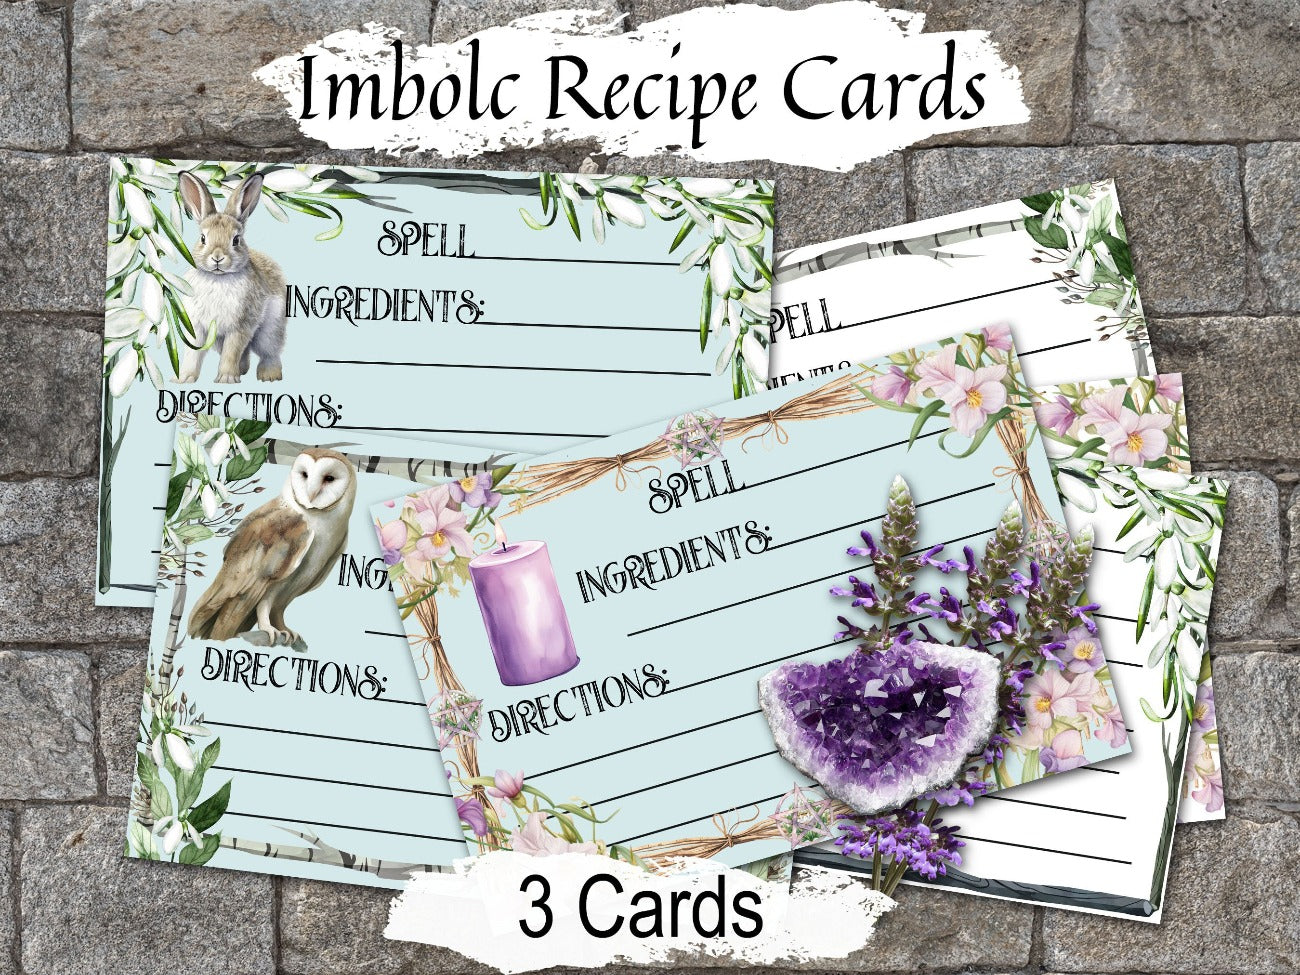 IMBOLC SPELL CARDS, Record your herbal recipes, crafts, apothecary portions, & traditional magic spells for this Candlemas Wiccan Sabbat - Morgana Magick Spell